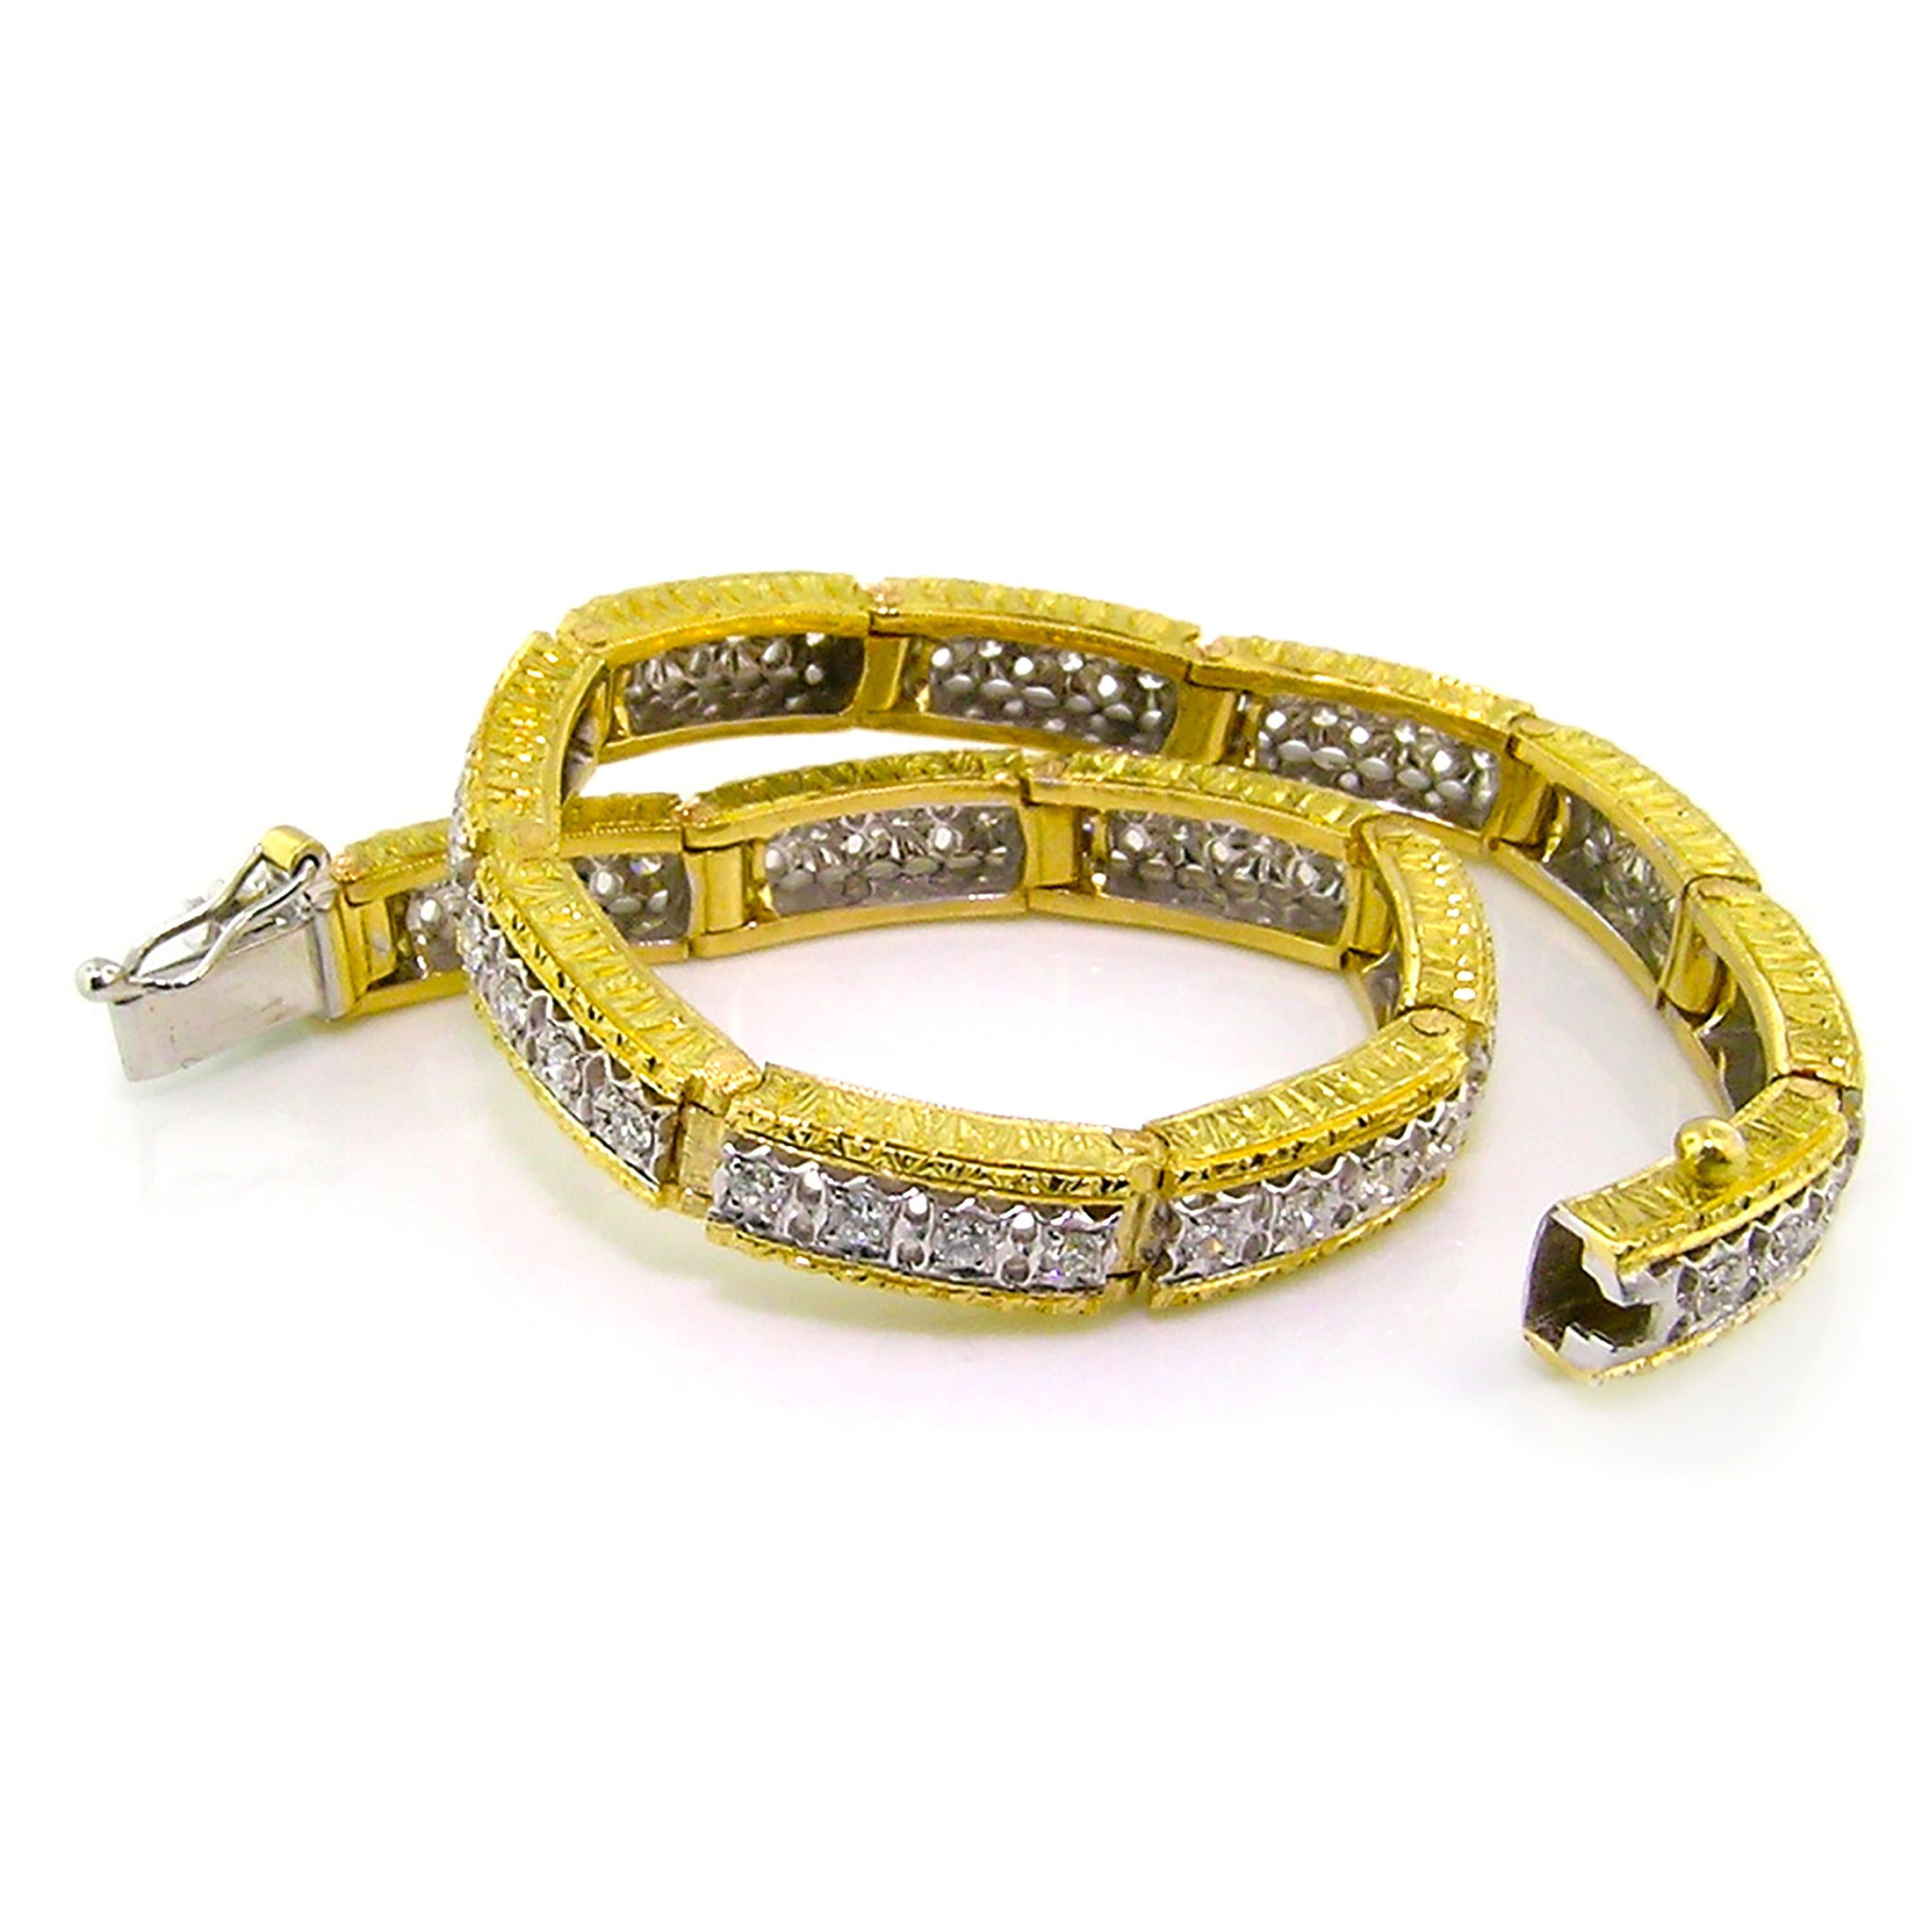 Round Cut 18kt Gold and Diamond Florentine Engraved Bracelet, Handmade in Italy For Sale